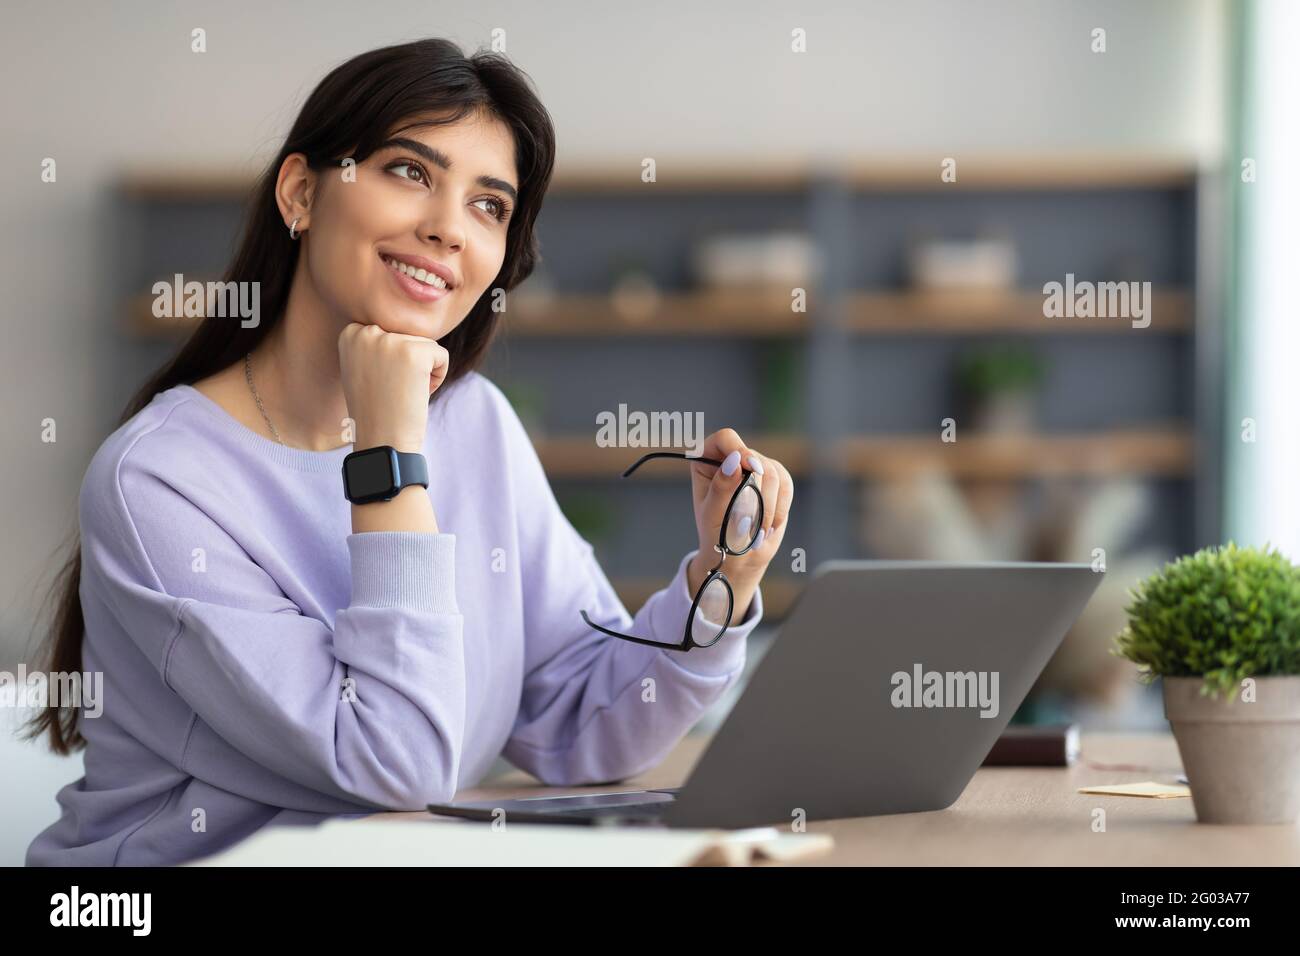 Portrait of smiling young woman sitting at desk adn thinking Stock Photo